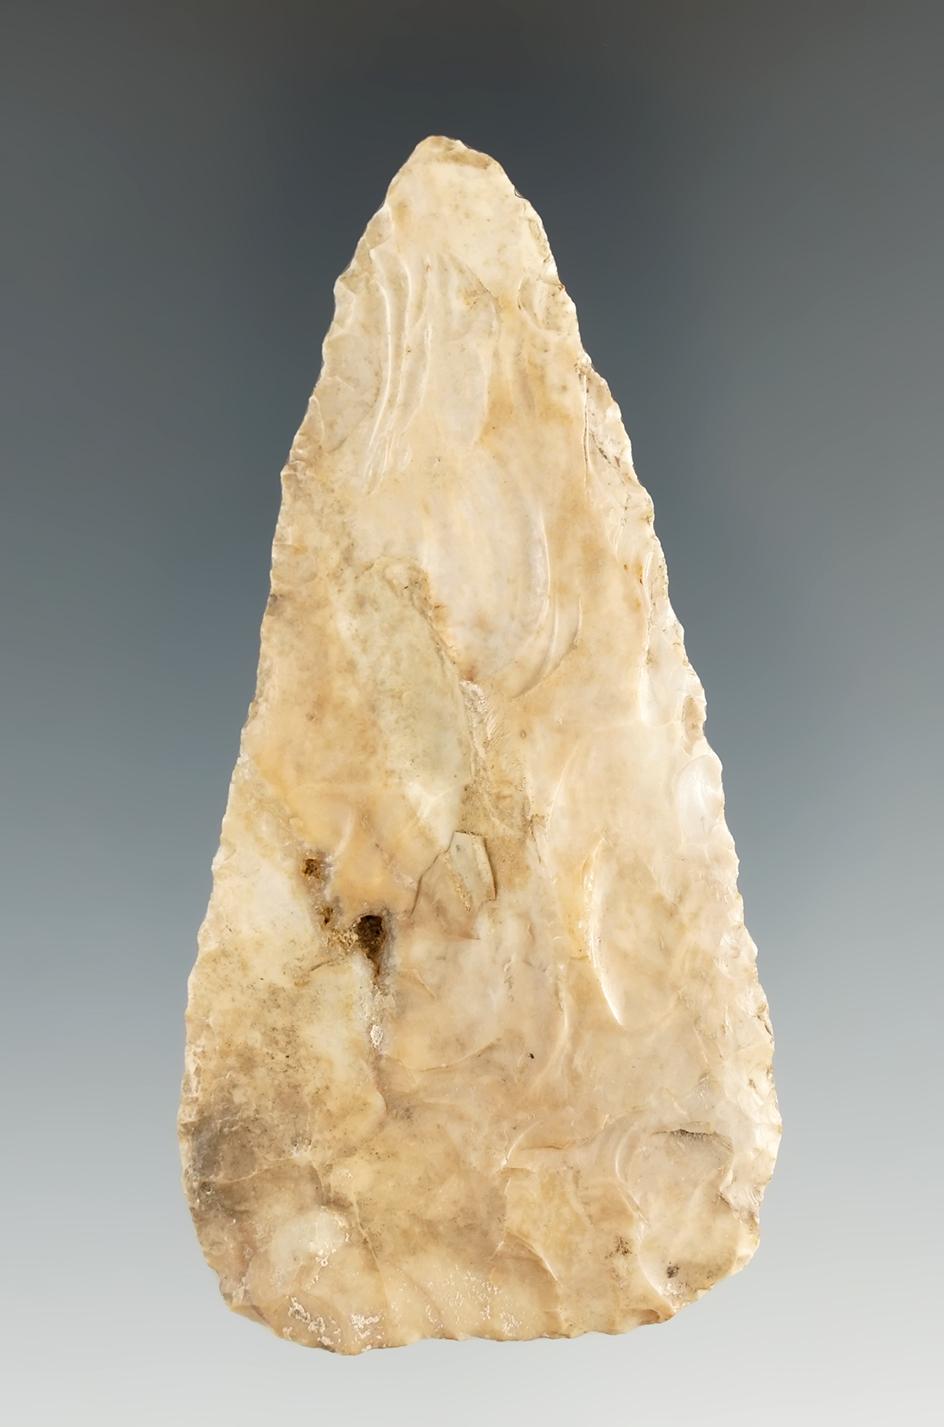 Heavily patinated 3 1/4" Flint Blade found in Indiana.